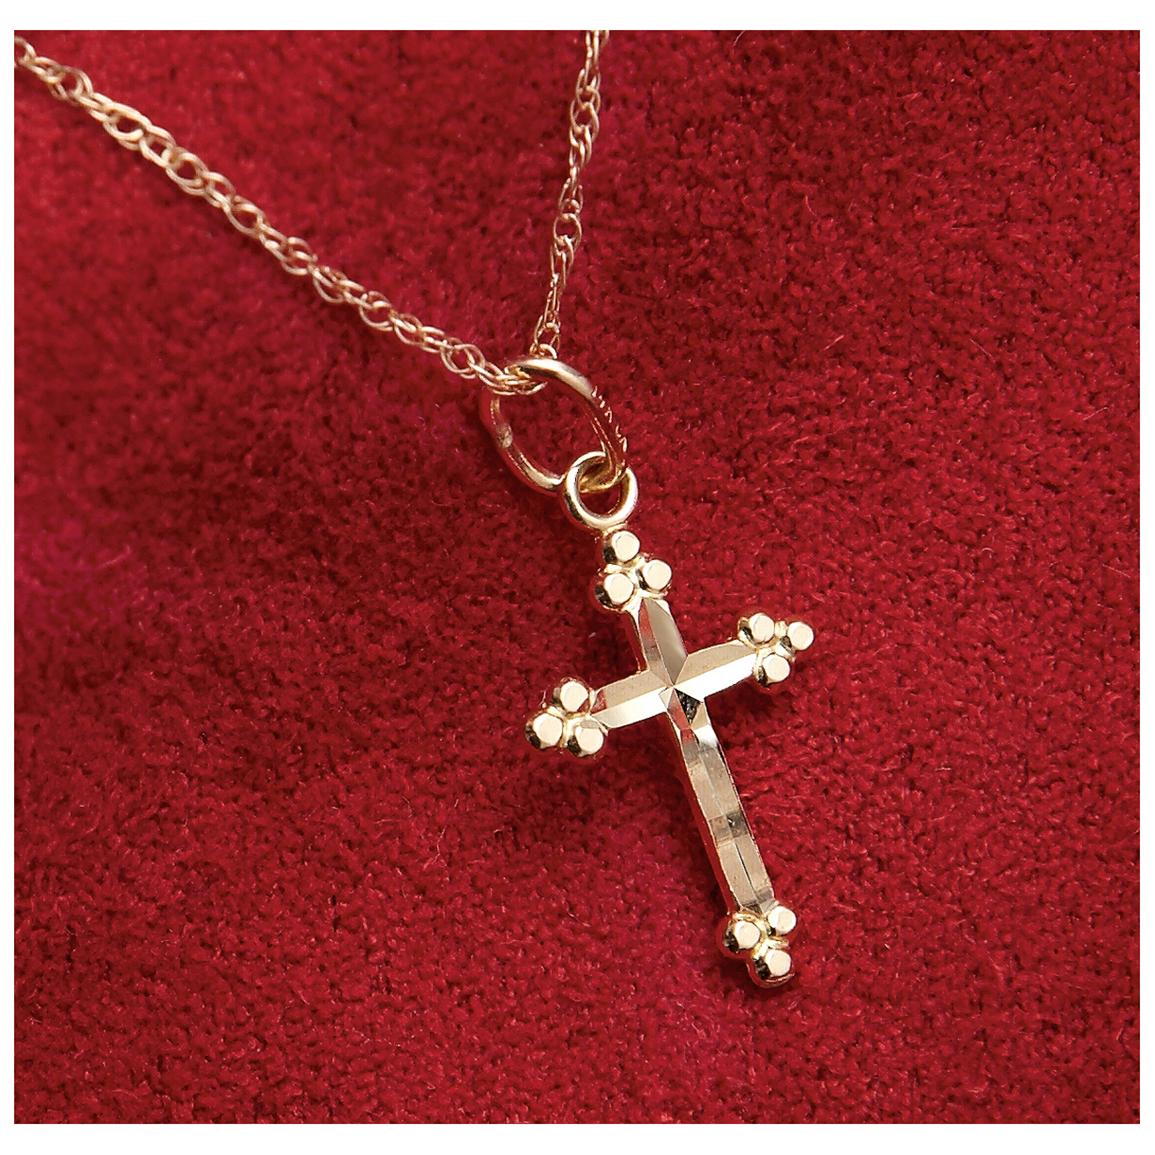 14k Gold Cross Necklace - 229048, Jewelry at Sportsman's Guide